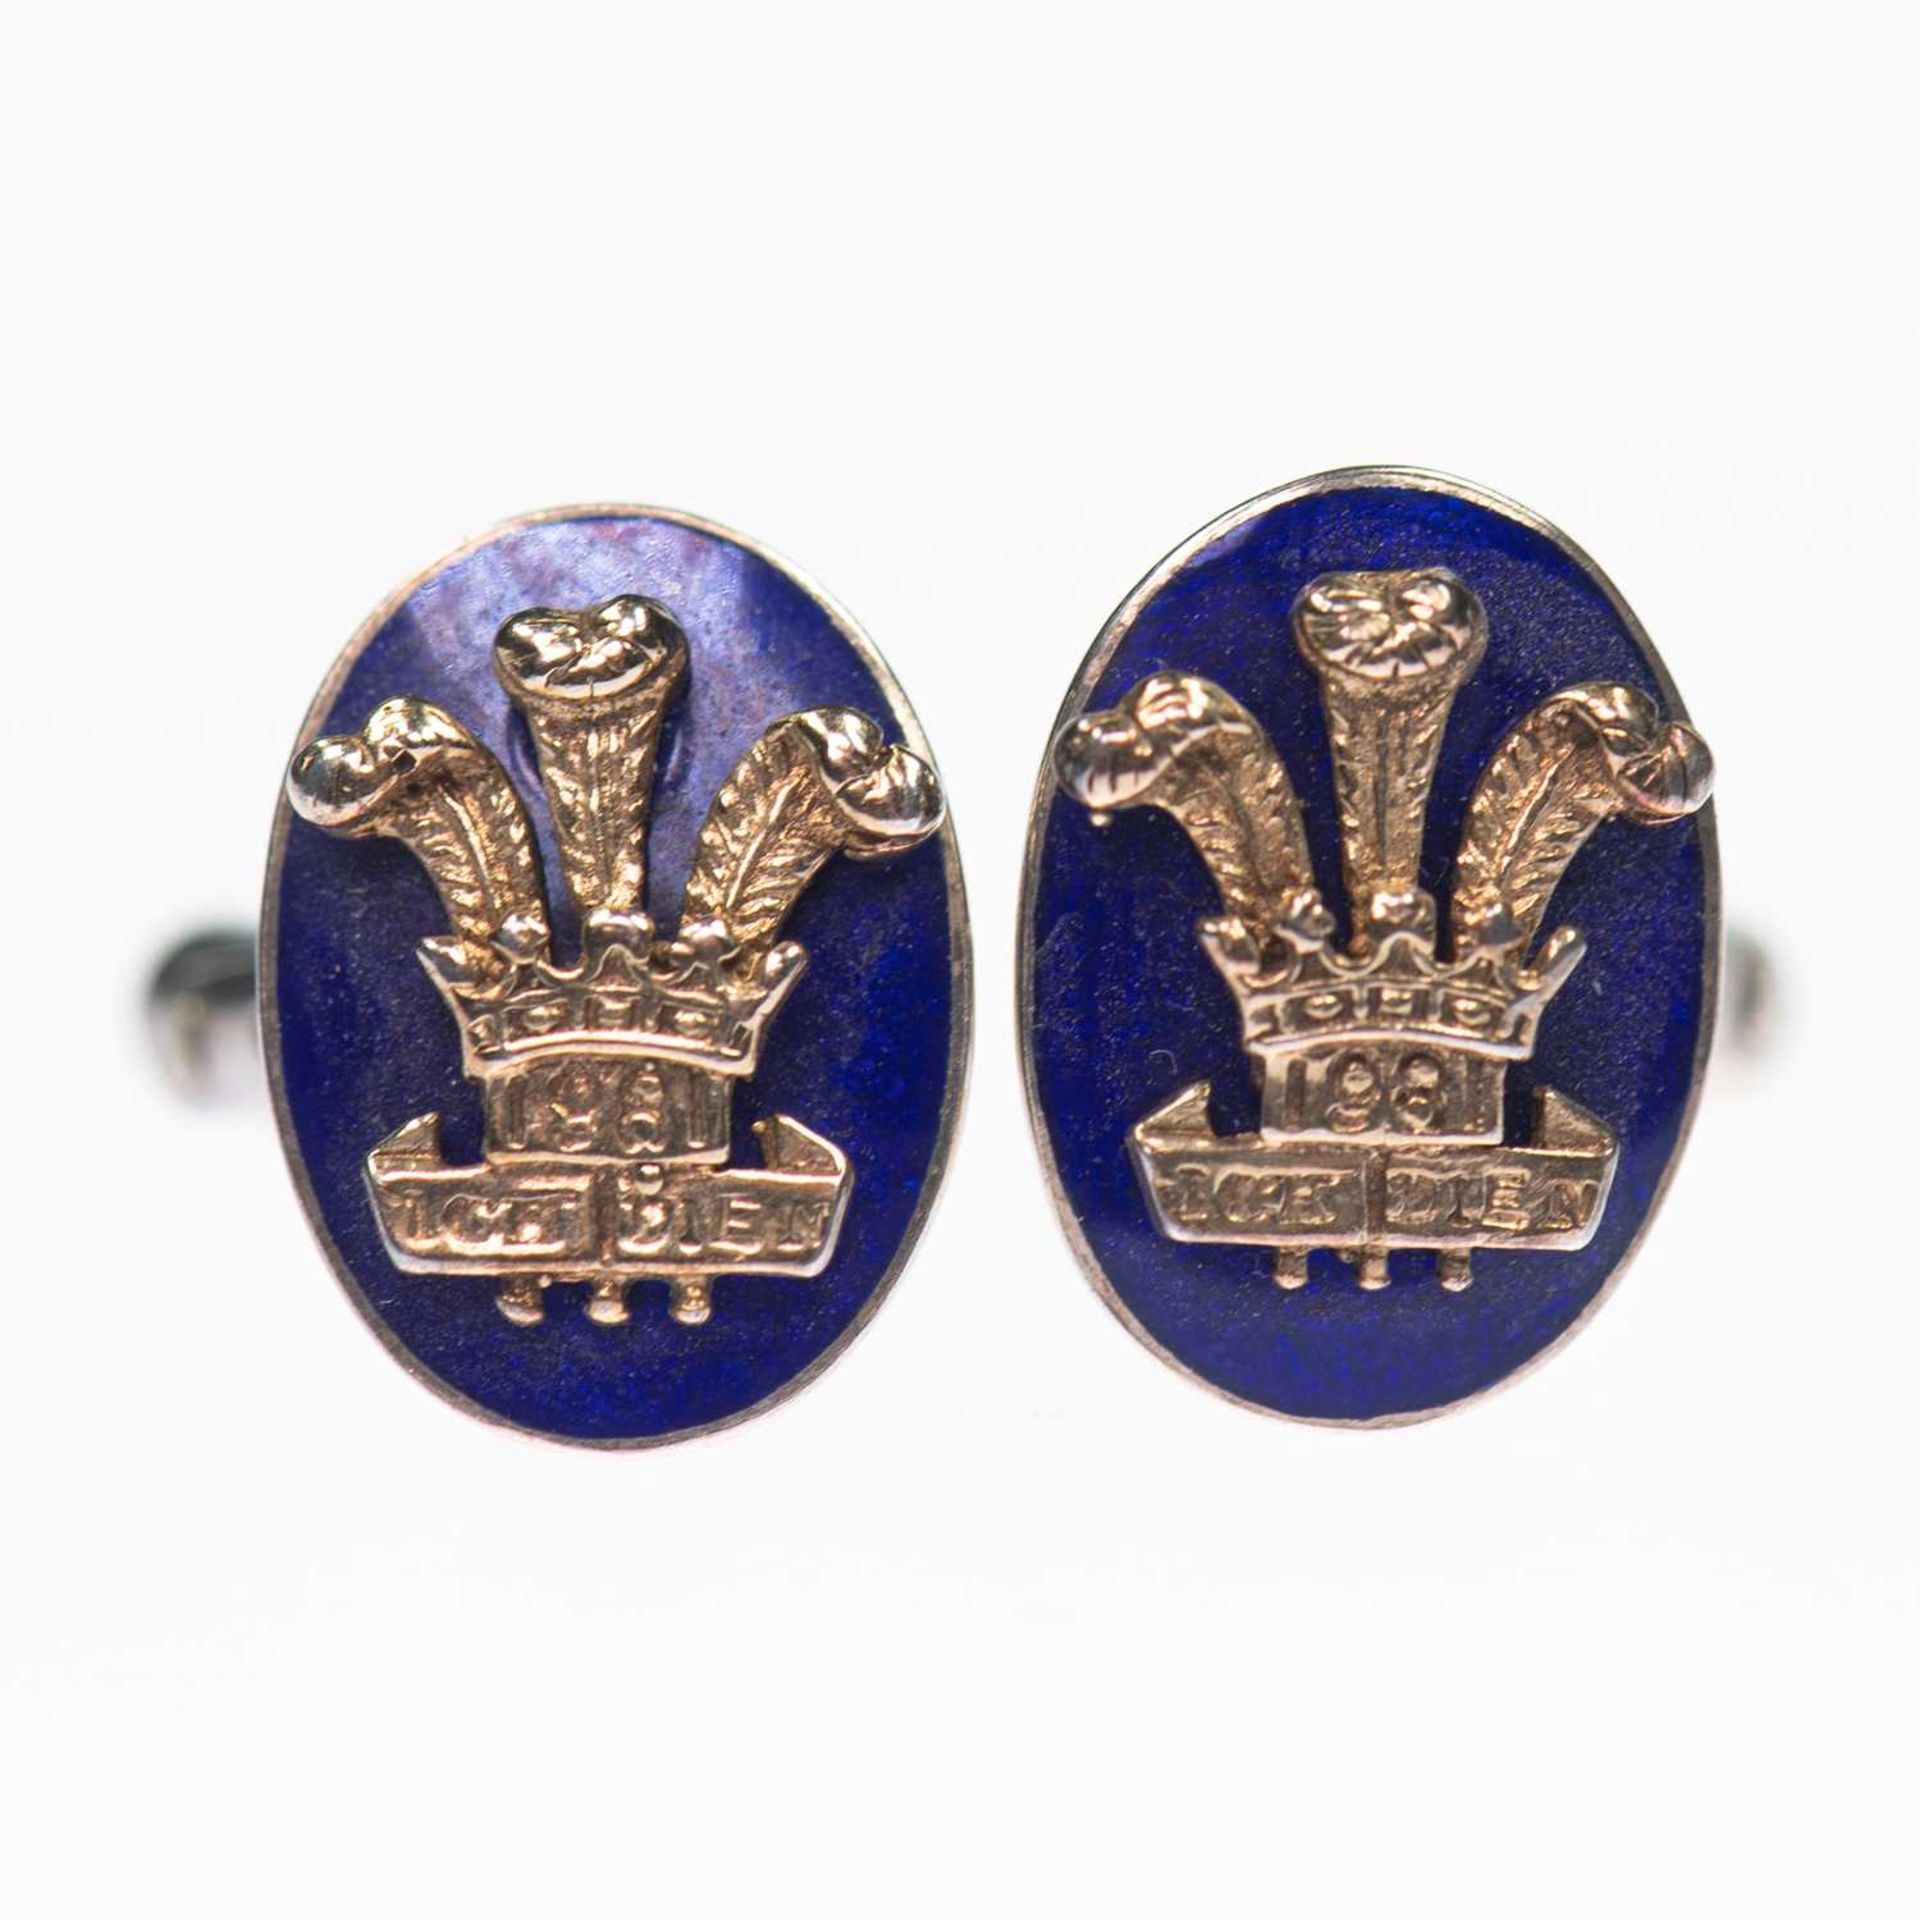 A PAIR OF ROYAL COMMEMORATIVE SILVER AND ENAMEL CUFFLINKS